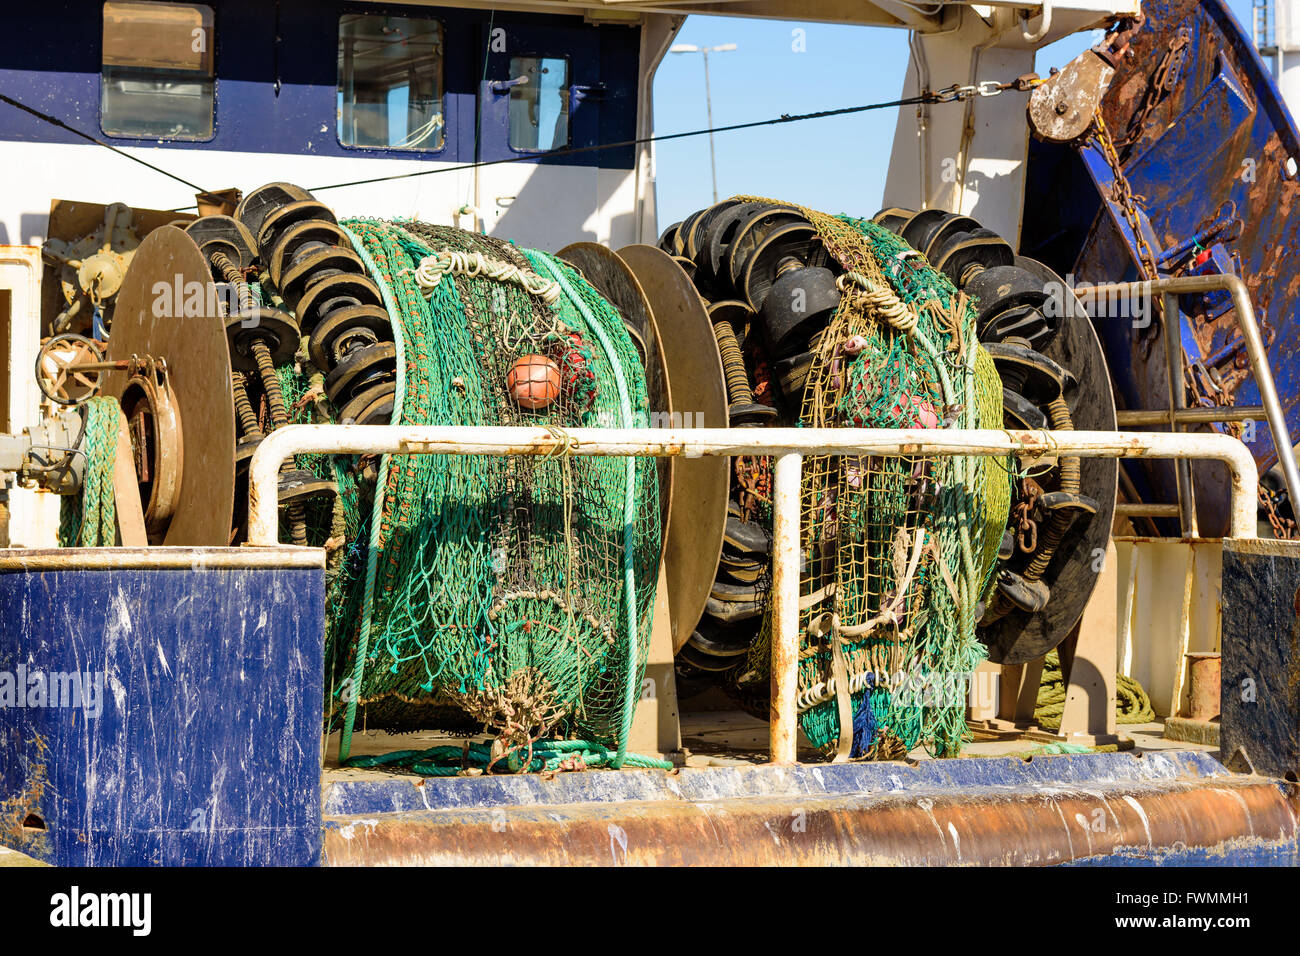 Rolled up fishing nets or trawls on the stern of a trawler fishing boat. Stock Photo